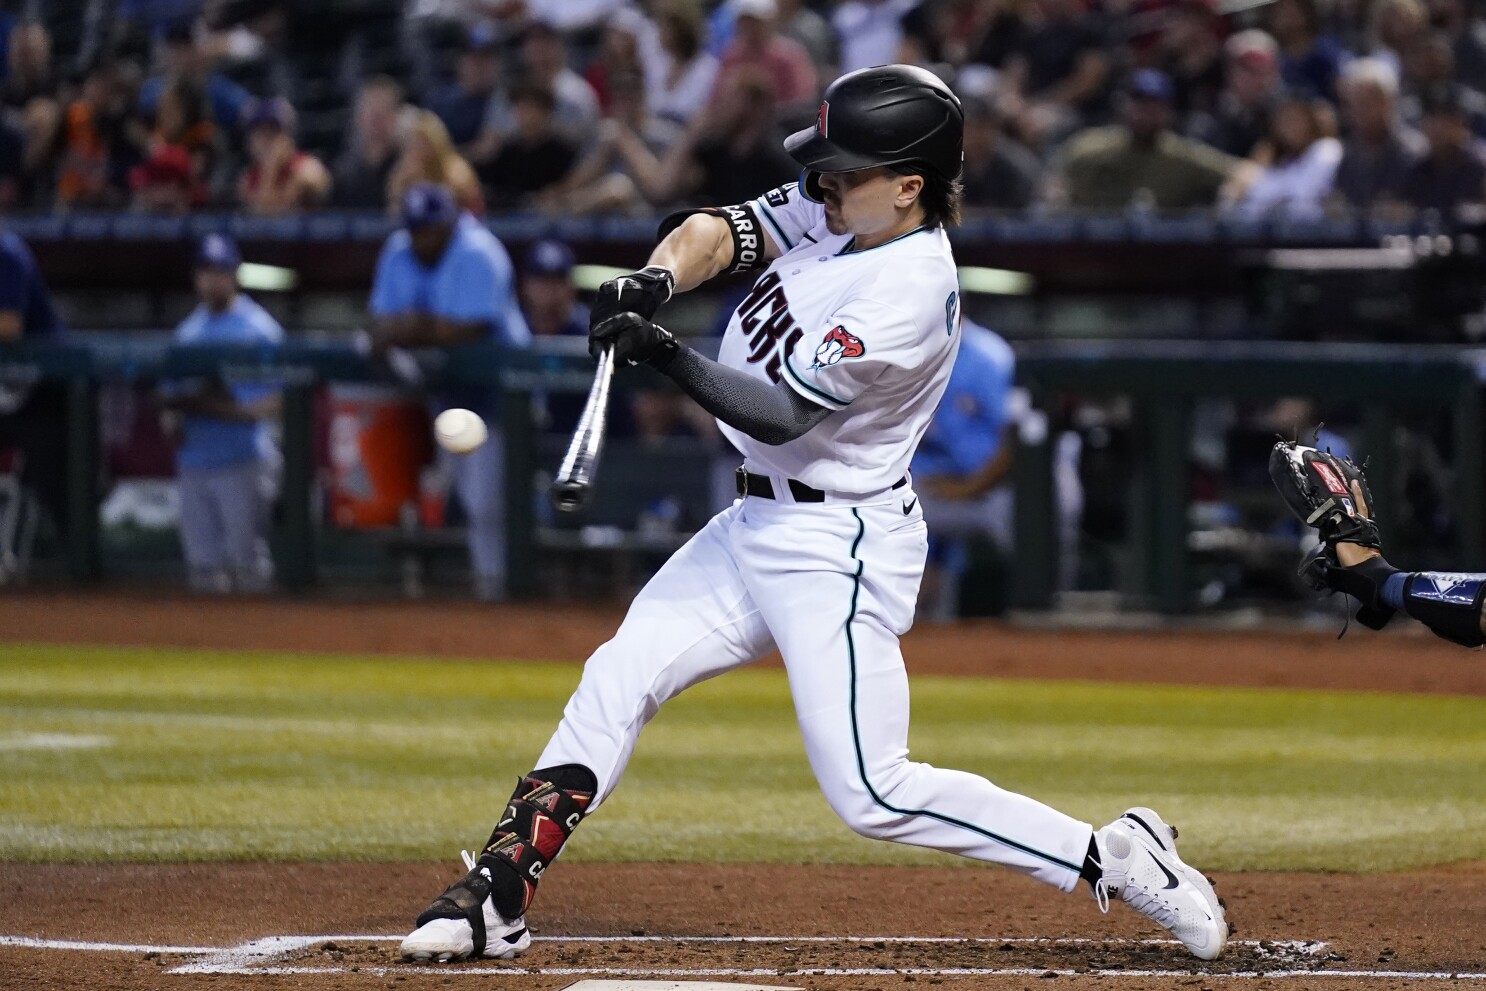 D-backs All-Star Carroll 'day to day' after exiting game with right  shoulder soreness